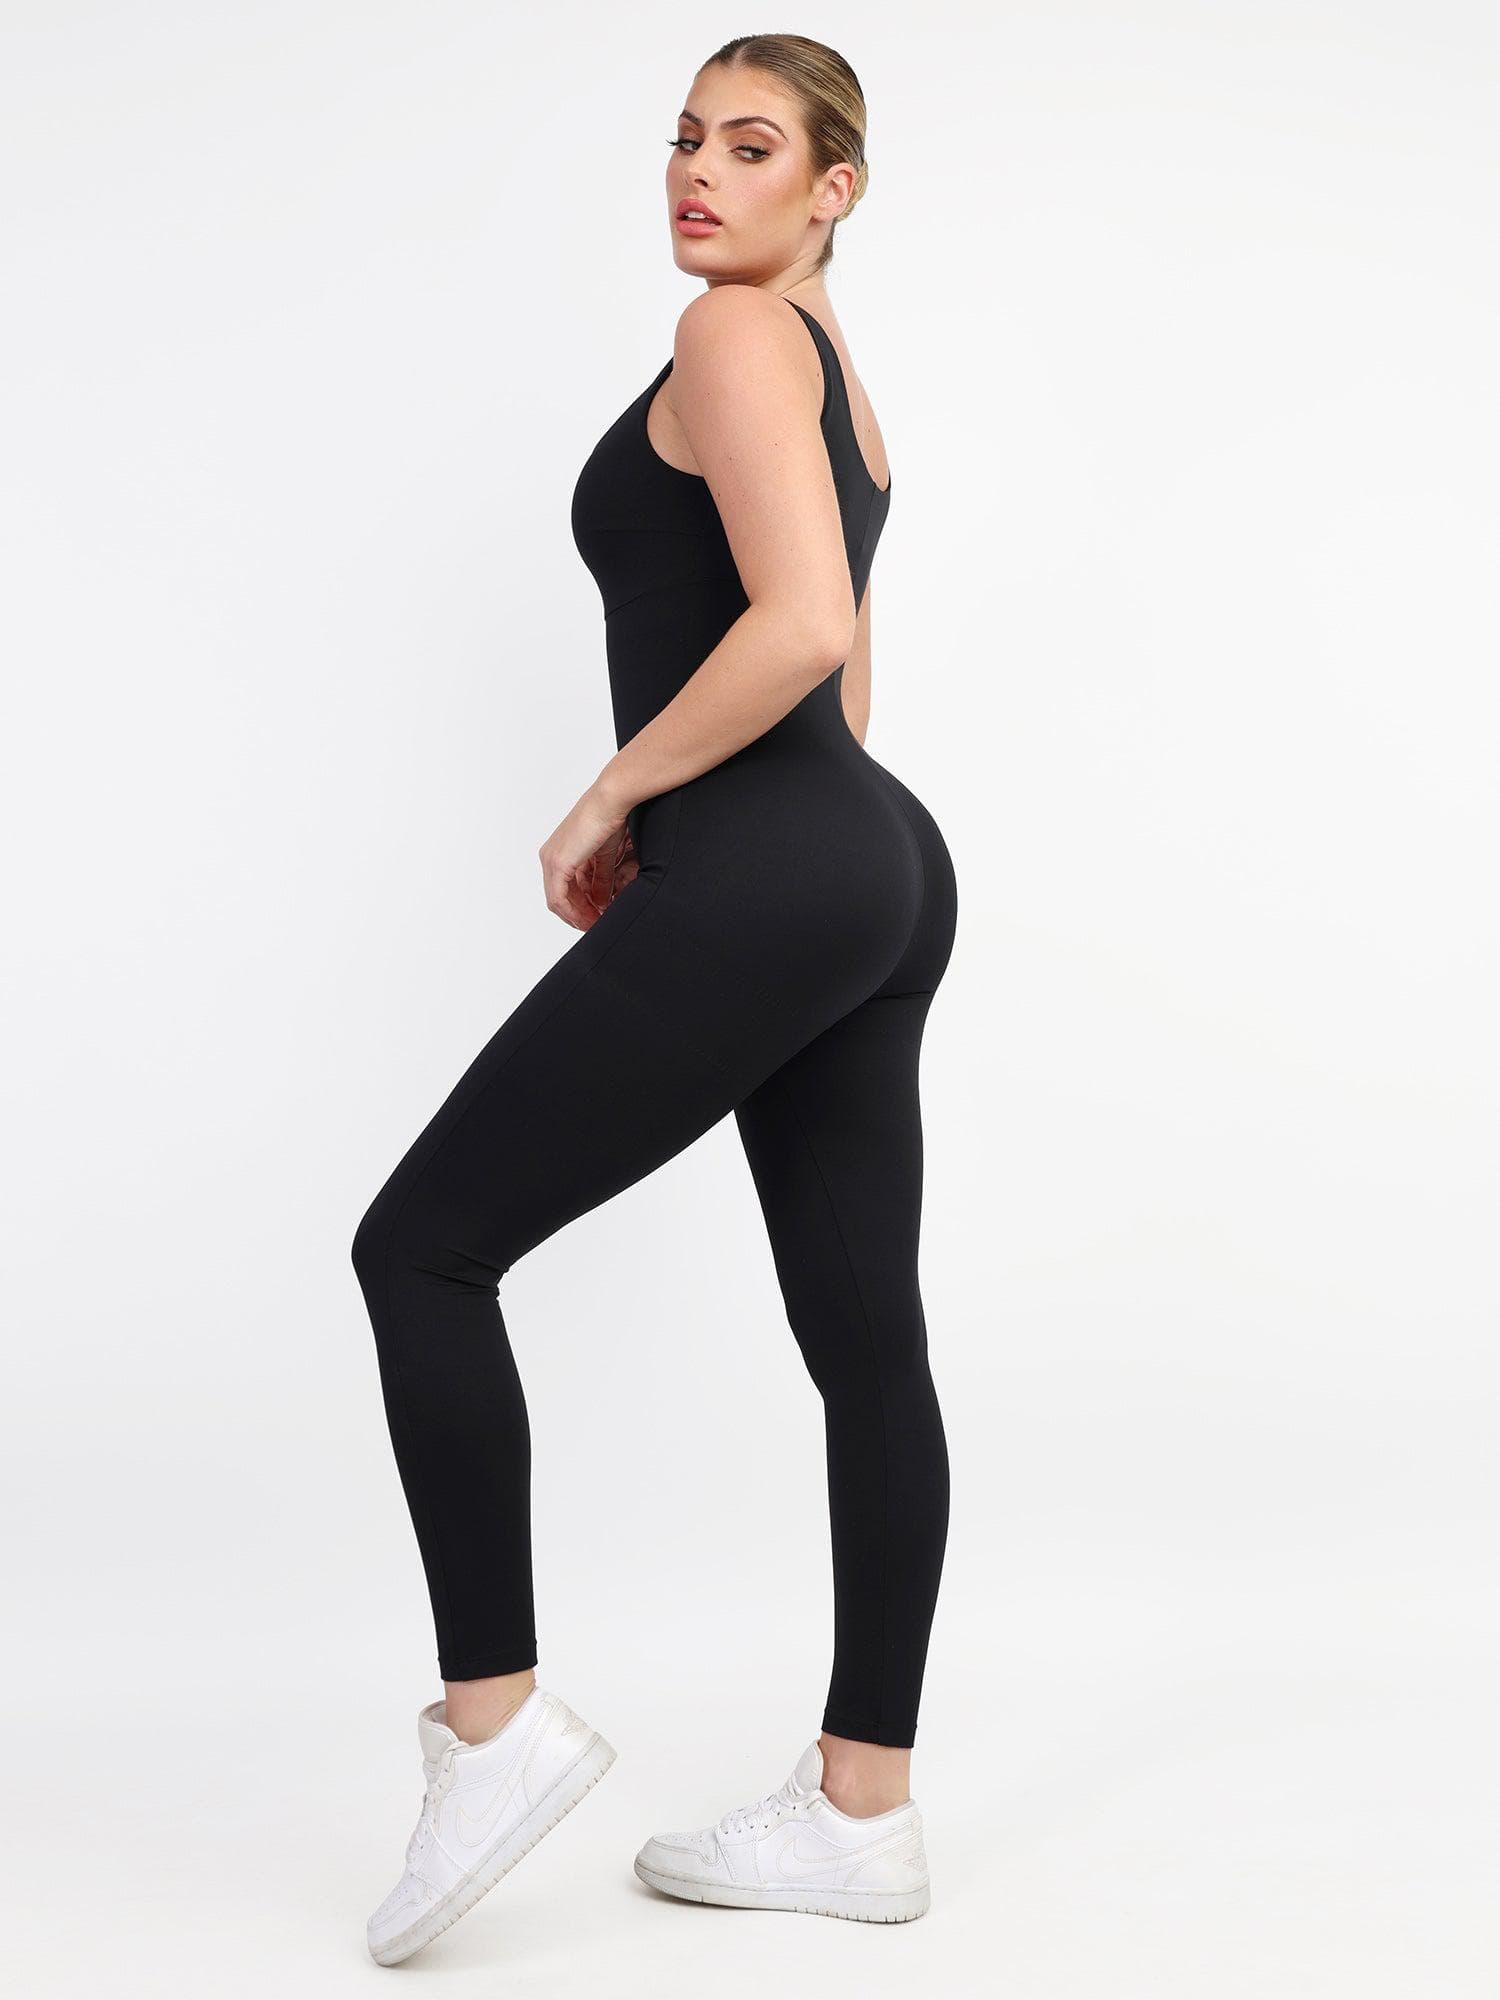 One Piece Tank Top Thigh Slimming Workout Jumpsuit